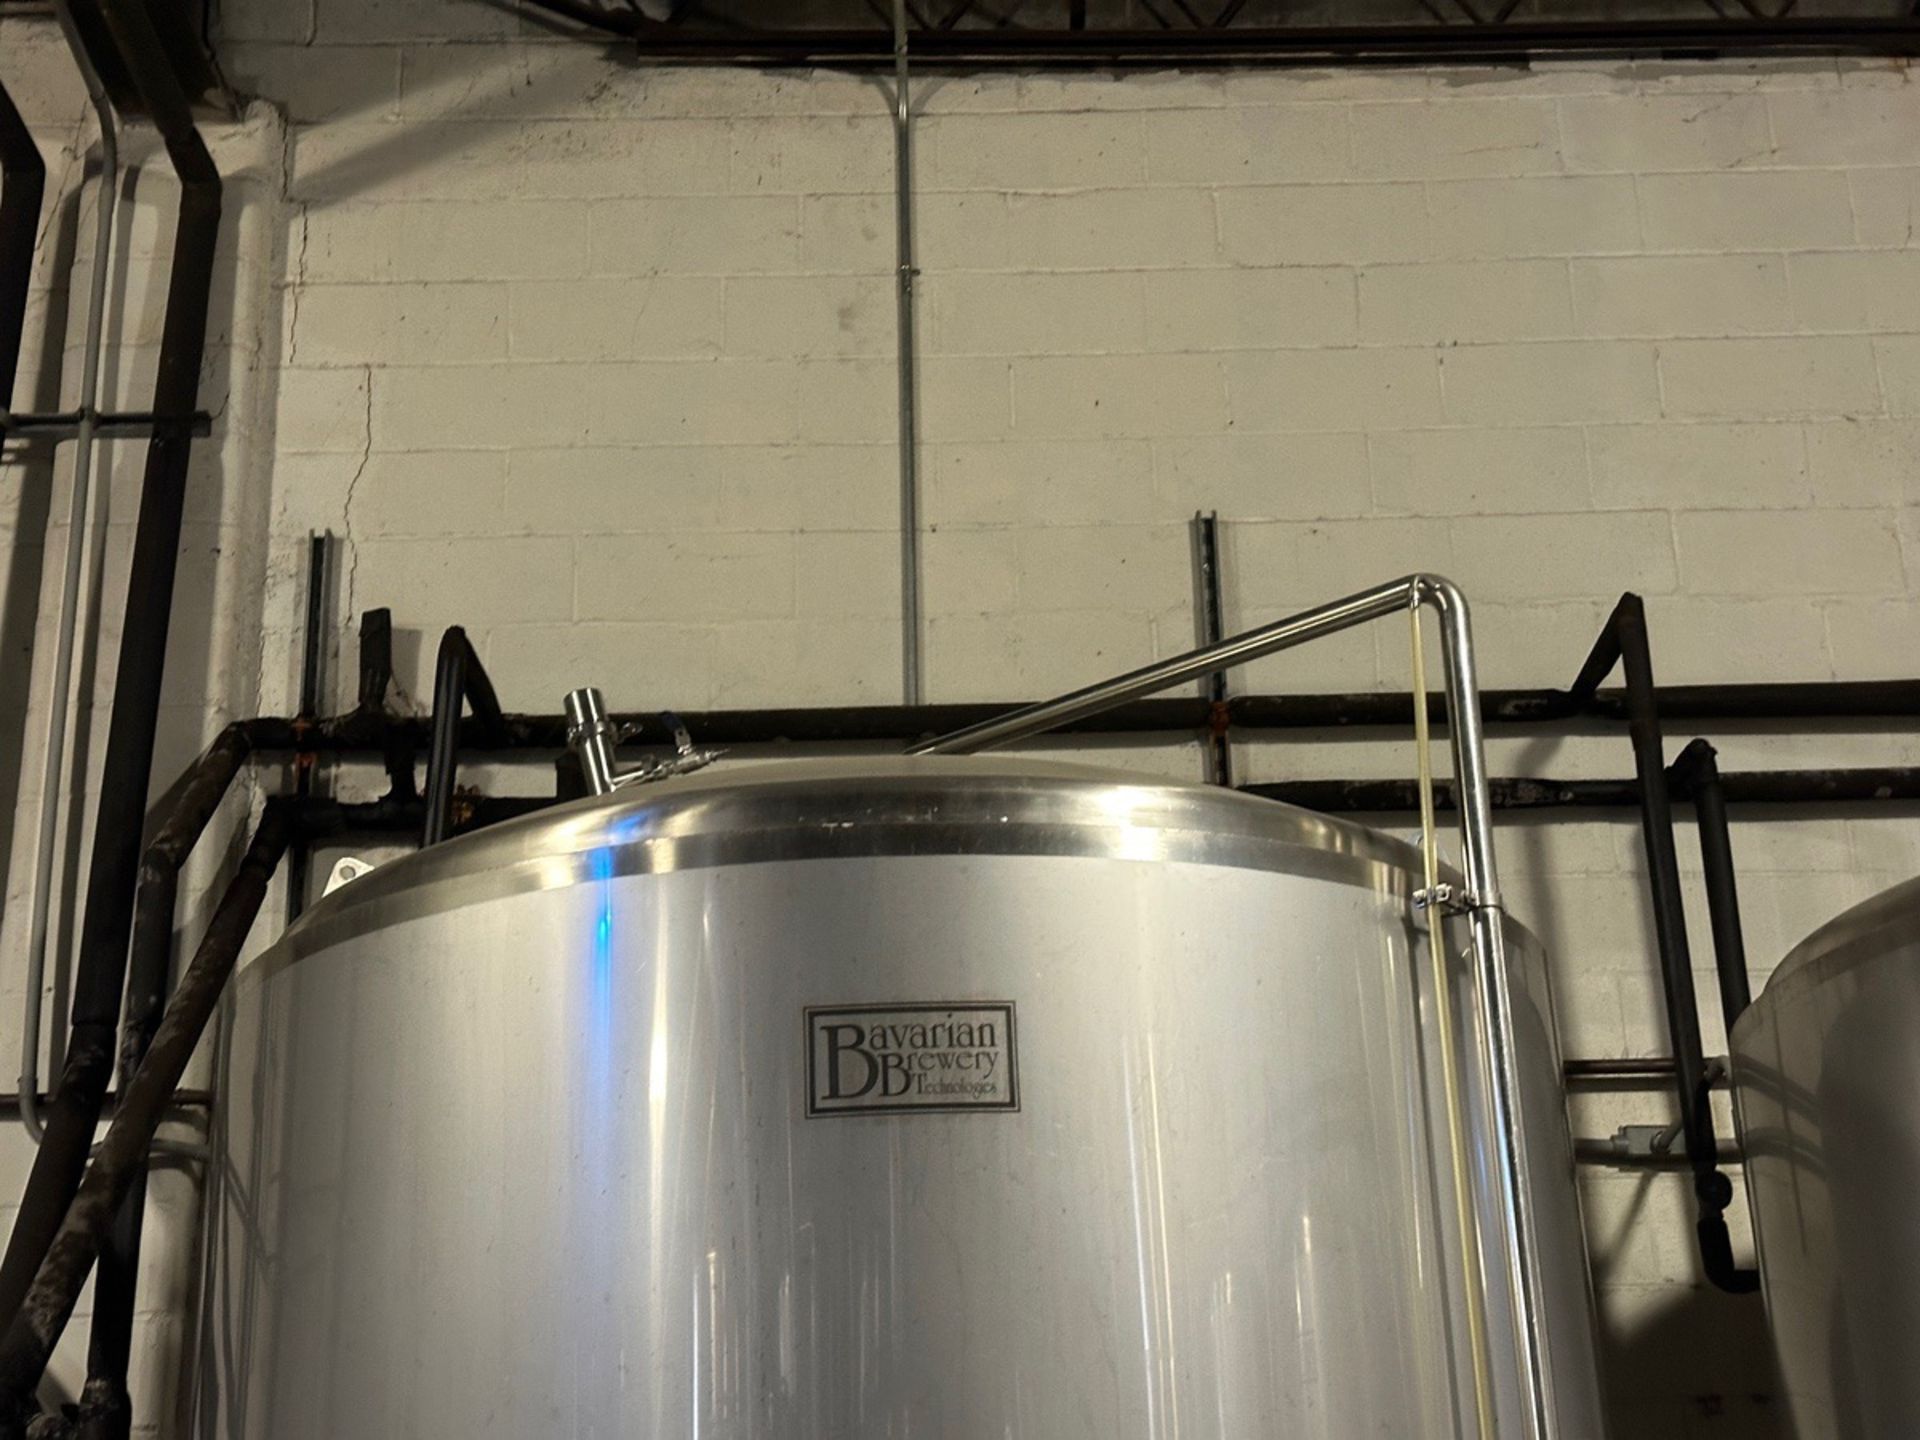 Bavarian Brew Tech 60 BBL Brite Tank, Glycol Jacketed, Approx 11'-2" H x 6'-4" OD | Rig Fee $2250 - Image 4 of 4